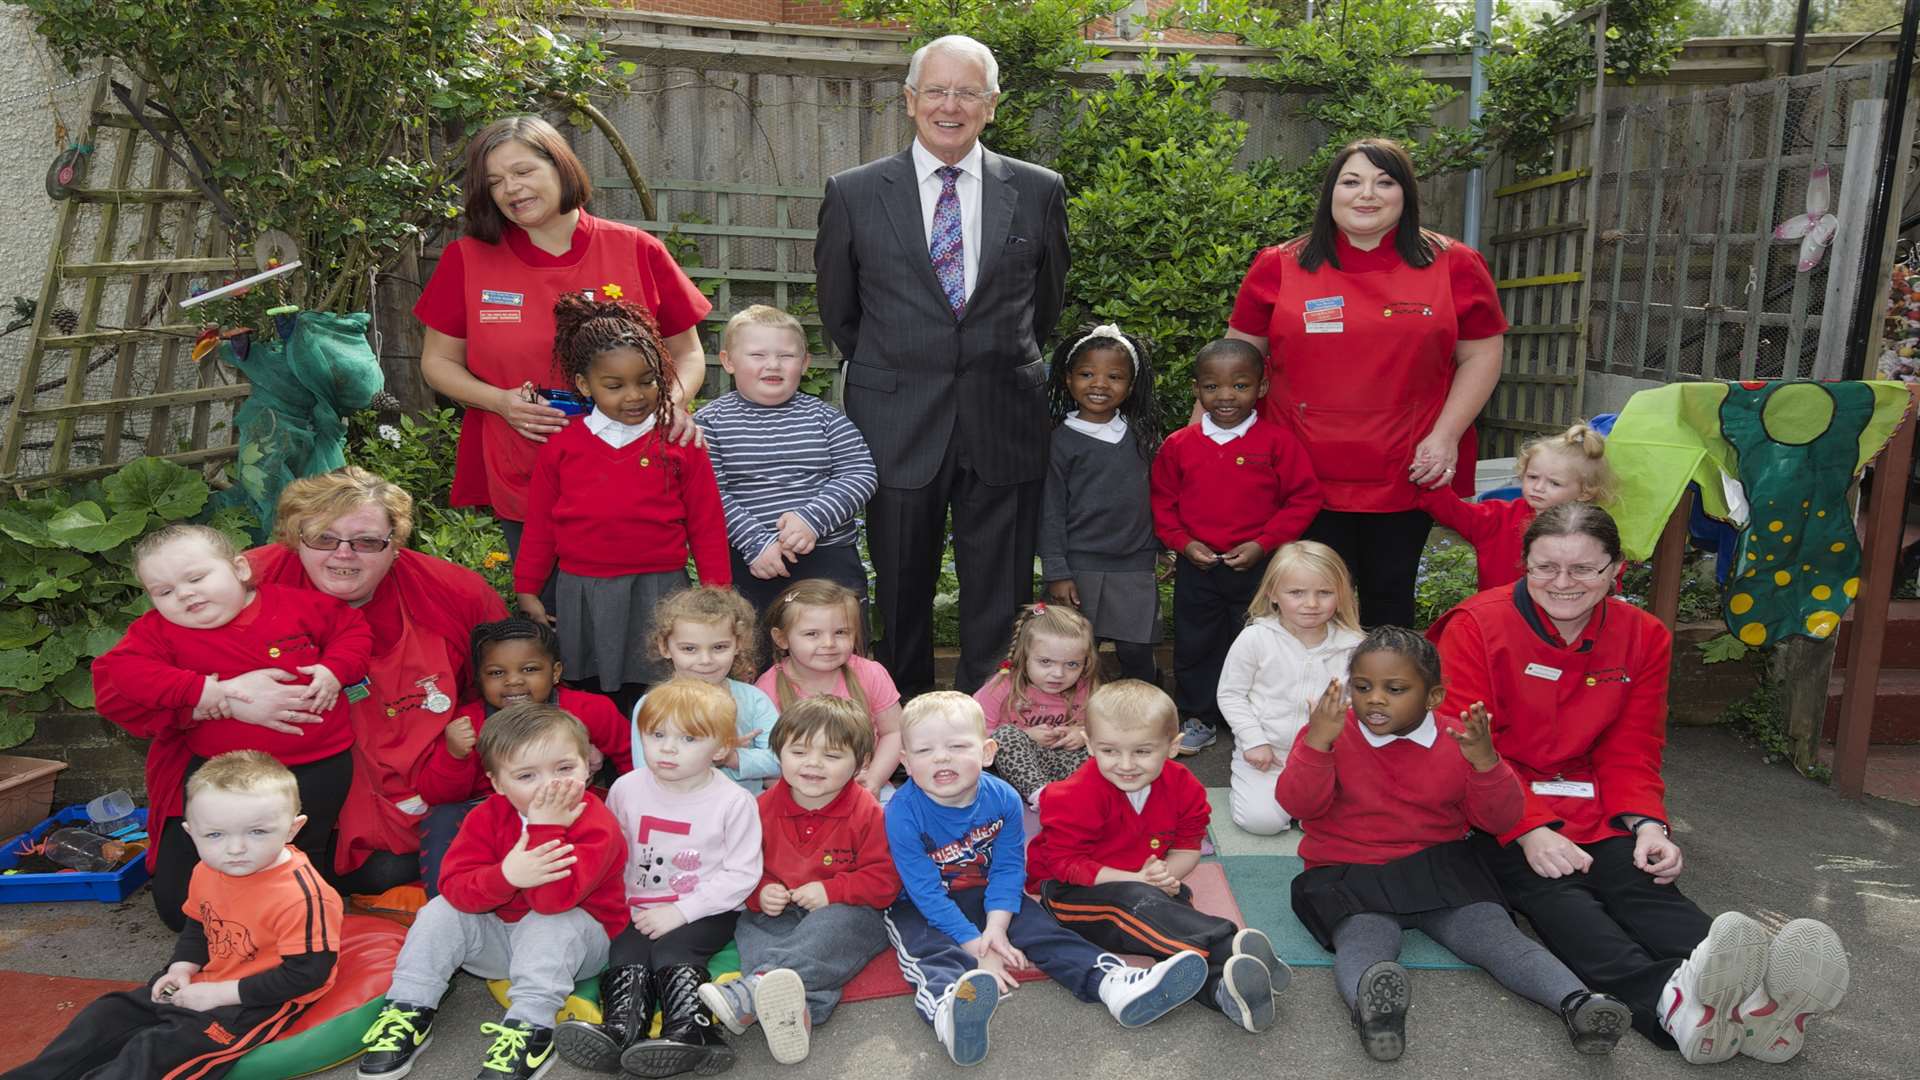 Cllr Mike O'Brien on a visit to 1st Tiny Steps Pre-School, Chatham in 2014